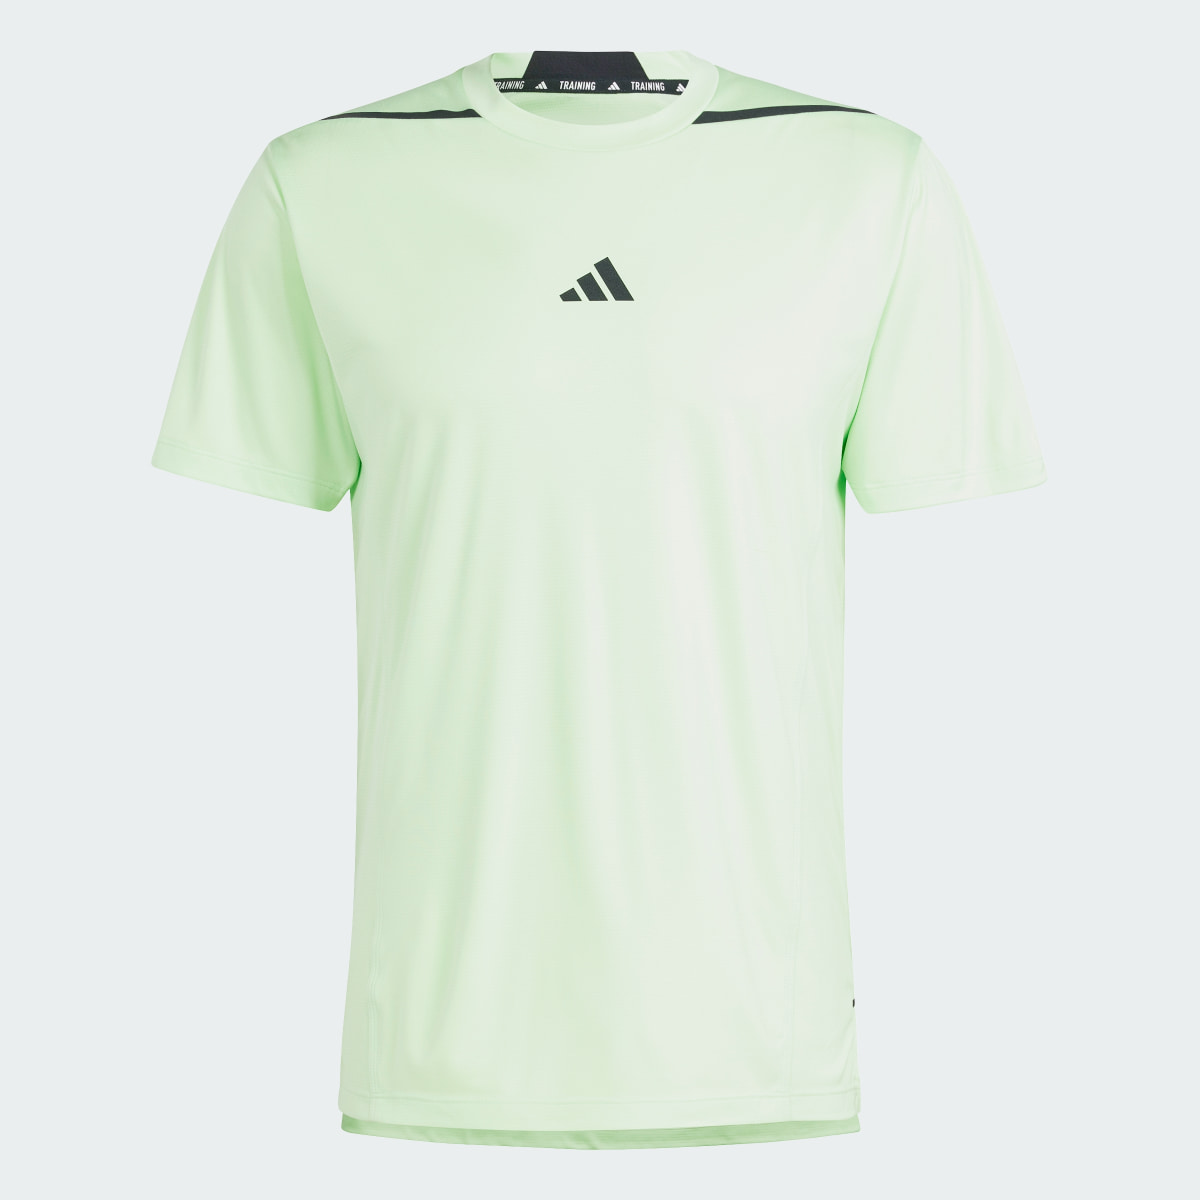 Adidas Designed for Training Adistrong Workout T-Shirt. 5